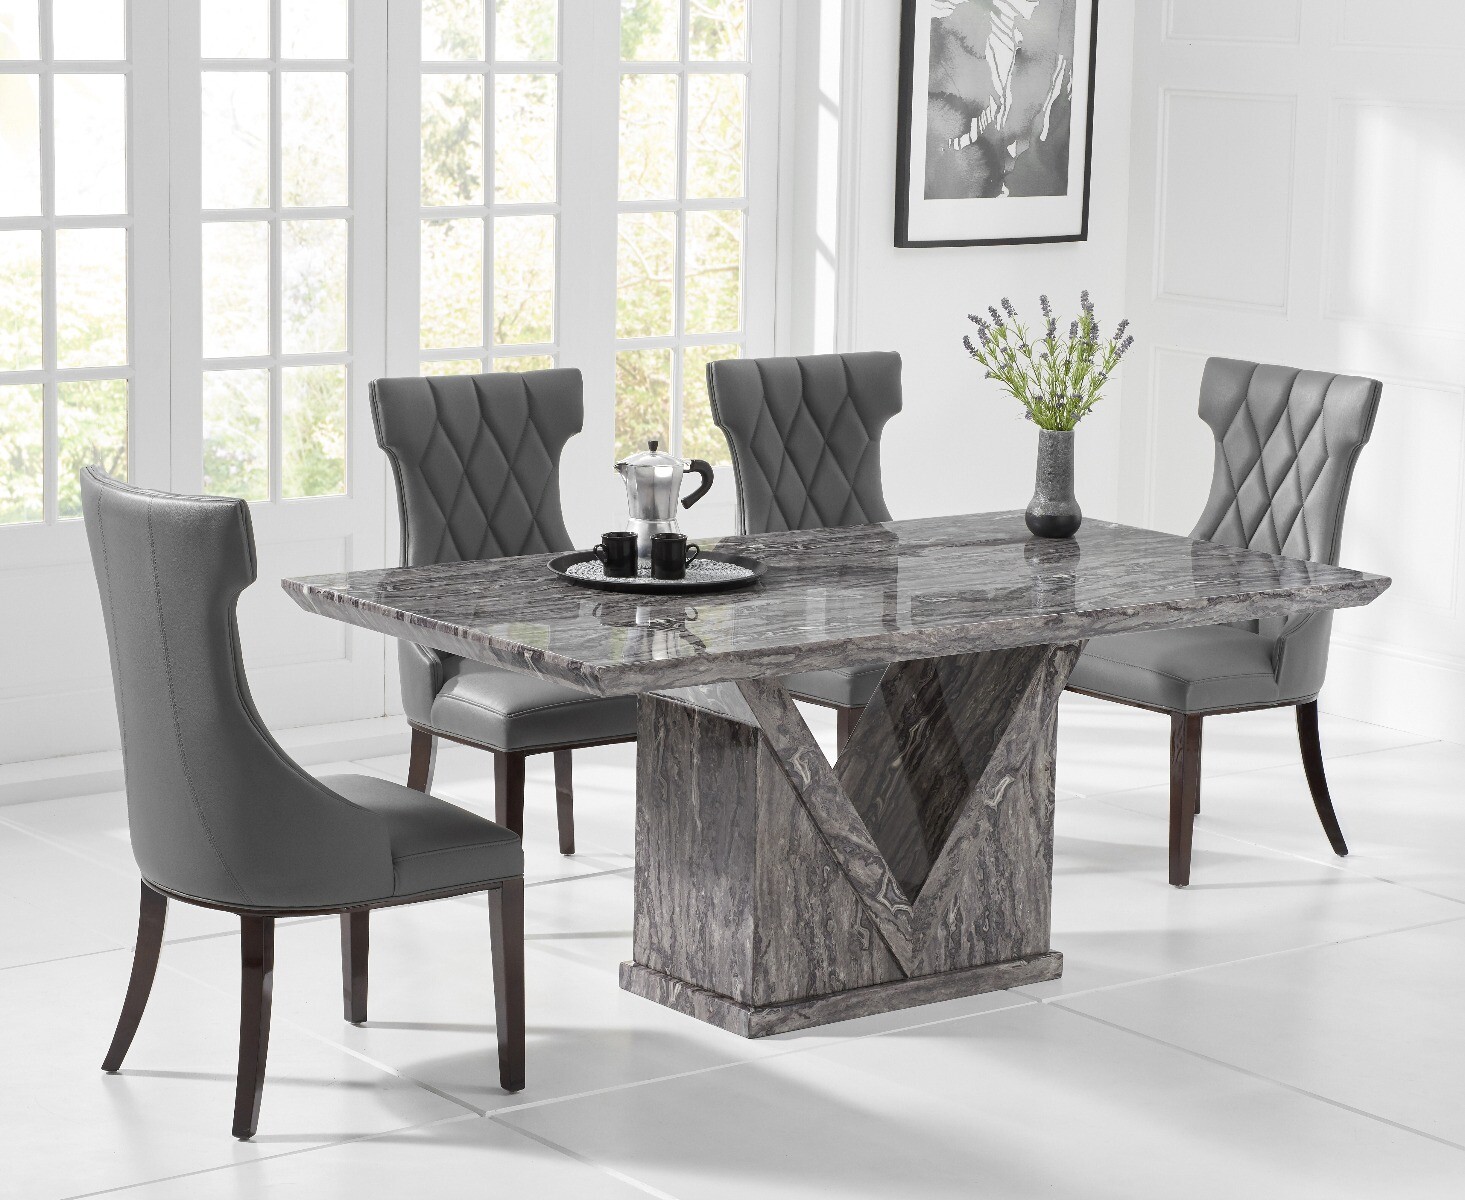 Milan 160cm Grey Marble Dining Table With 4 Cream Sophia Chairs